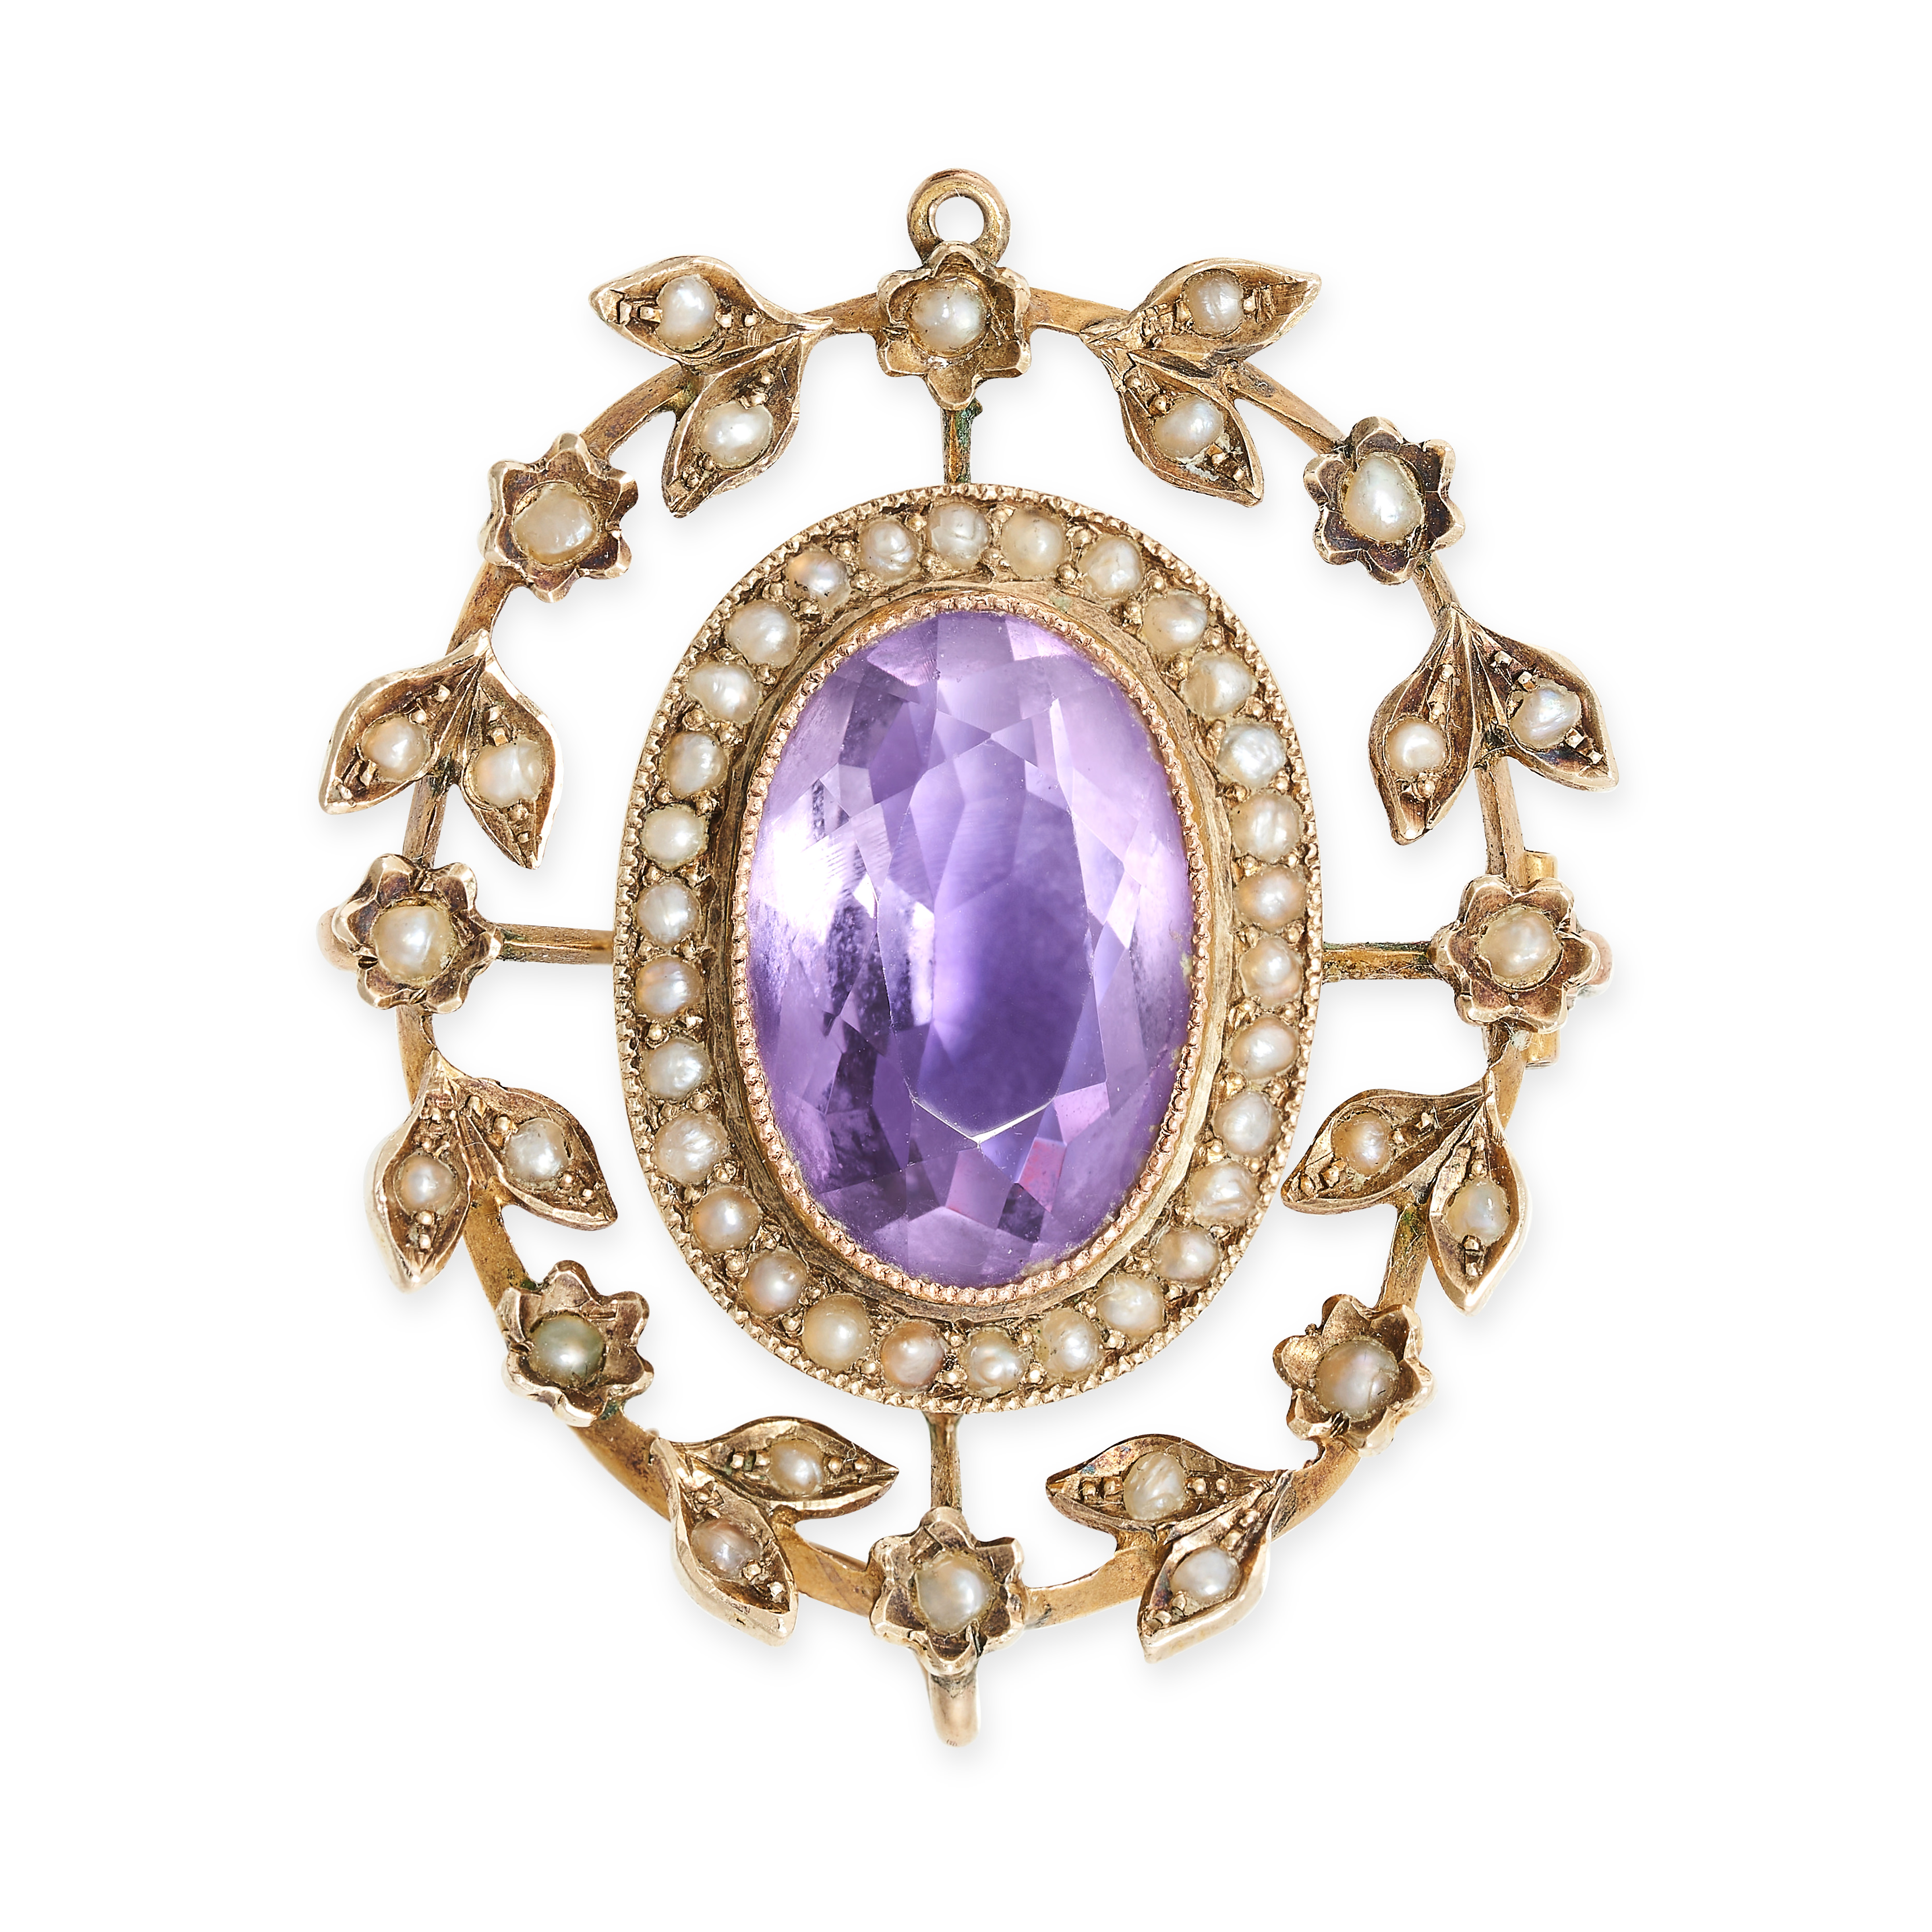 AN ANTIQUE EDWARDIAN AMETHYST AND PEARL PENDANT/BROOCH in 9ct yellow gold, set with an oval cut